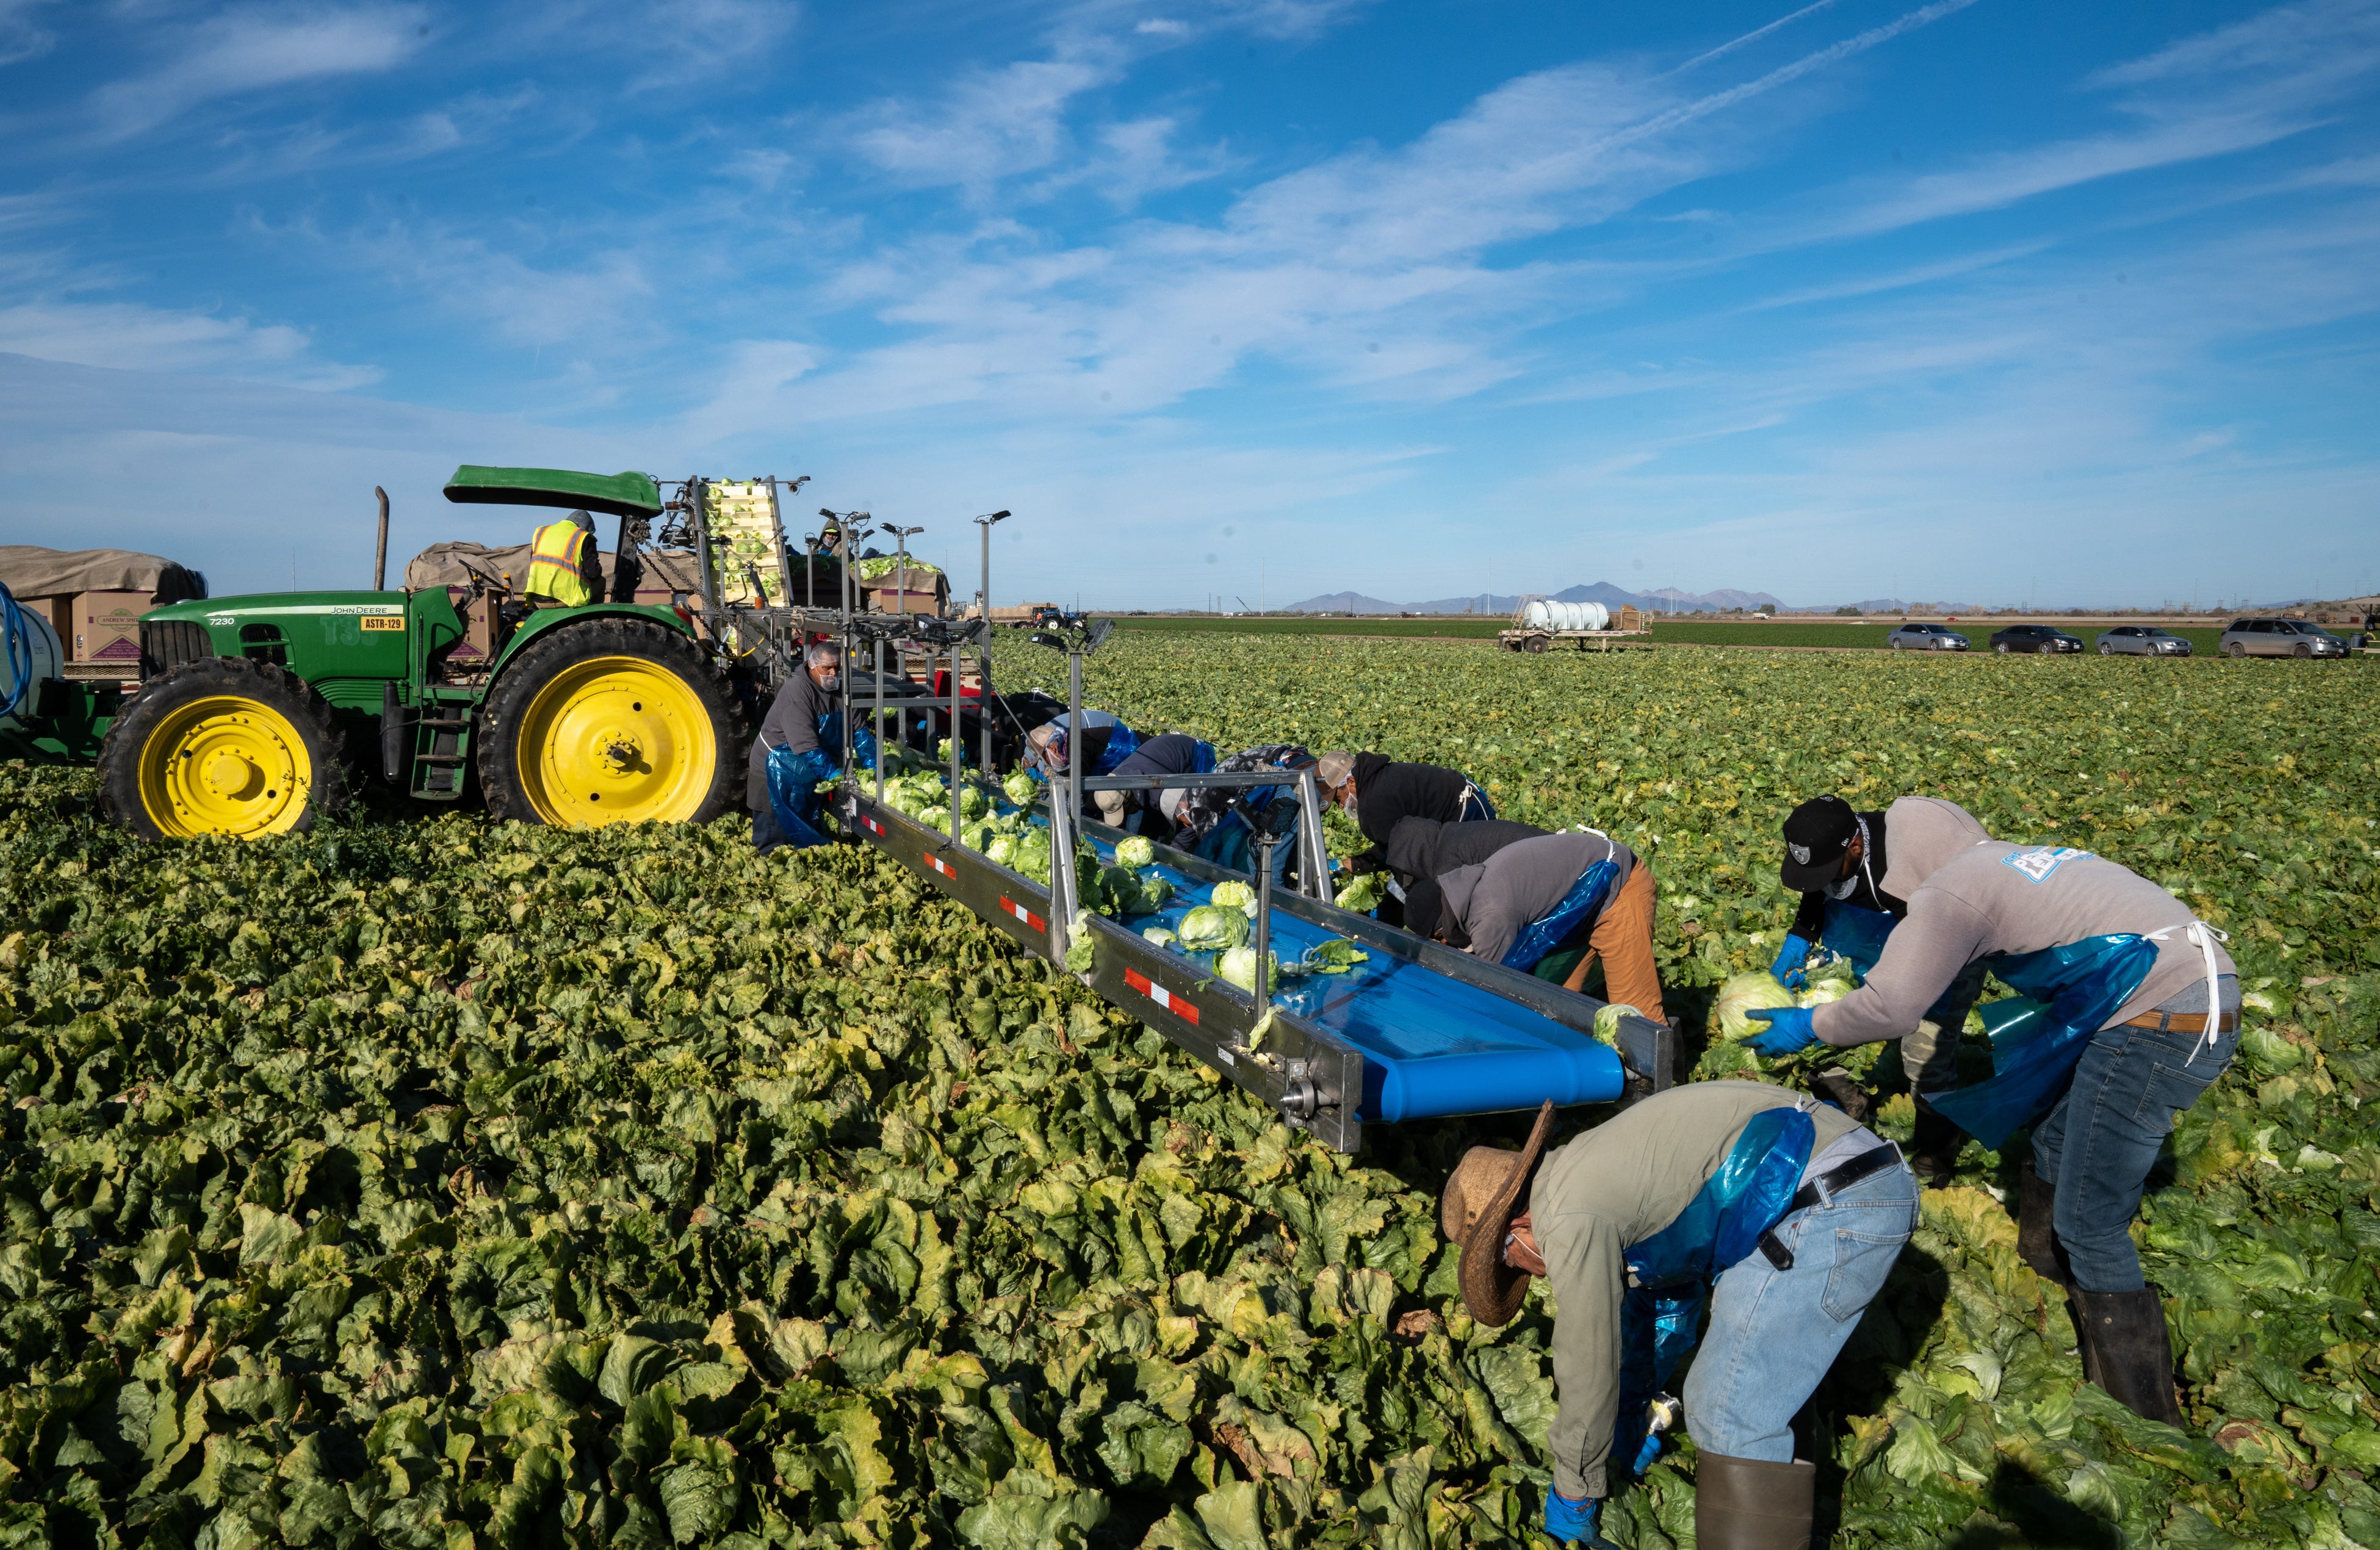 Workers harvest head lettuce in a field at Desert Premium Farms east of Yuma, on Jan. 28, 2022. So far Arizona farmers have borne the brunt of water cutbacks.